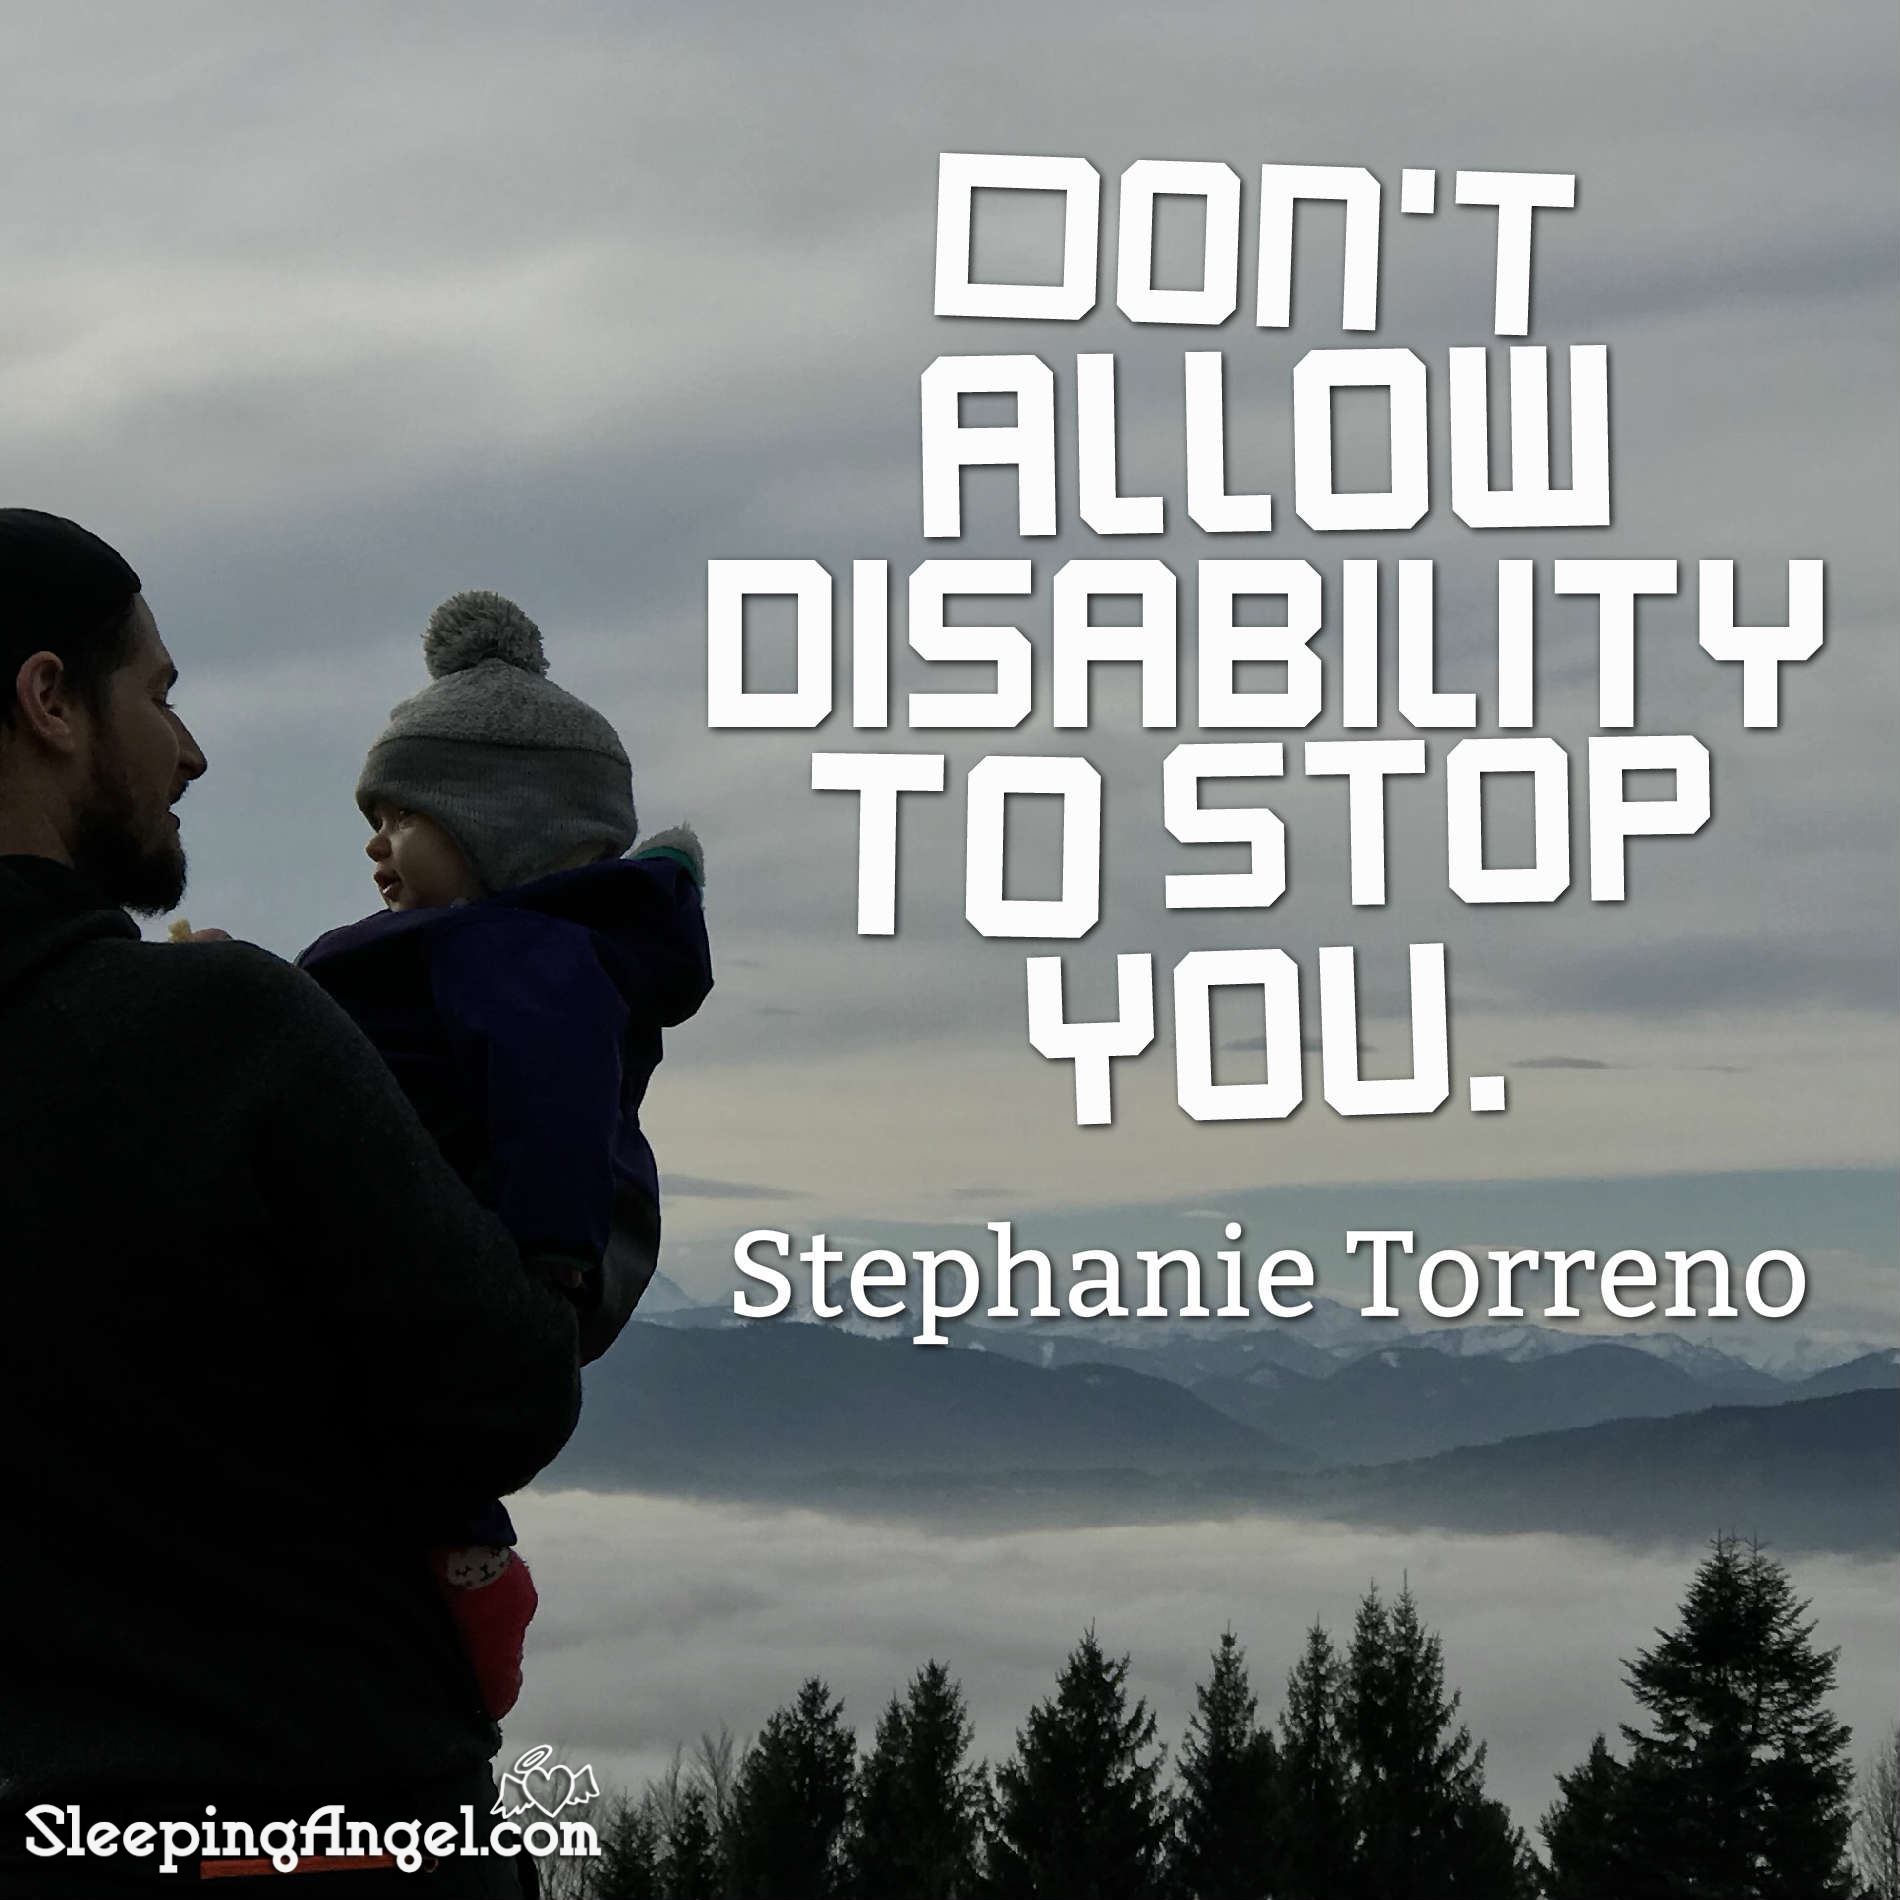 Disability Quote